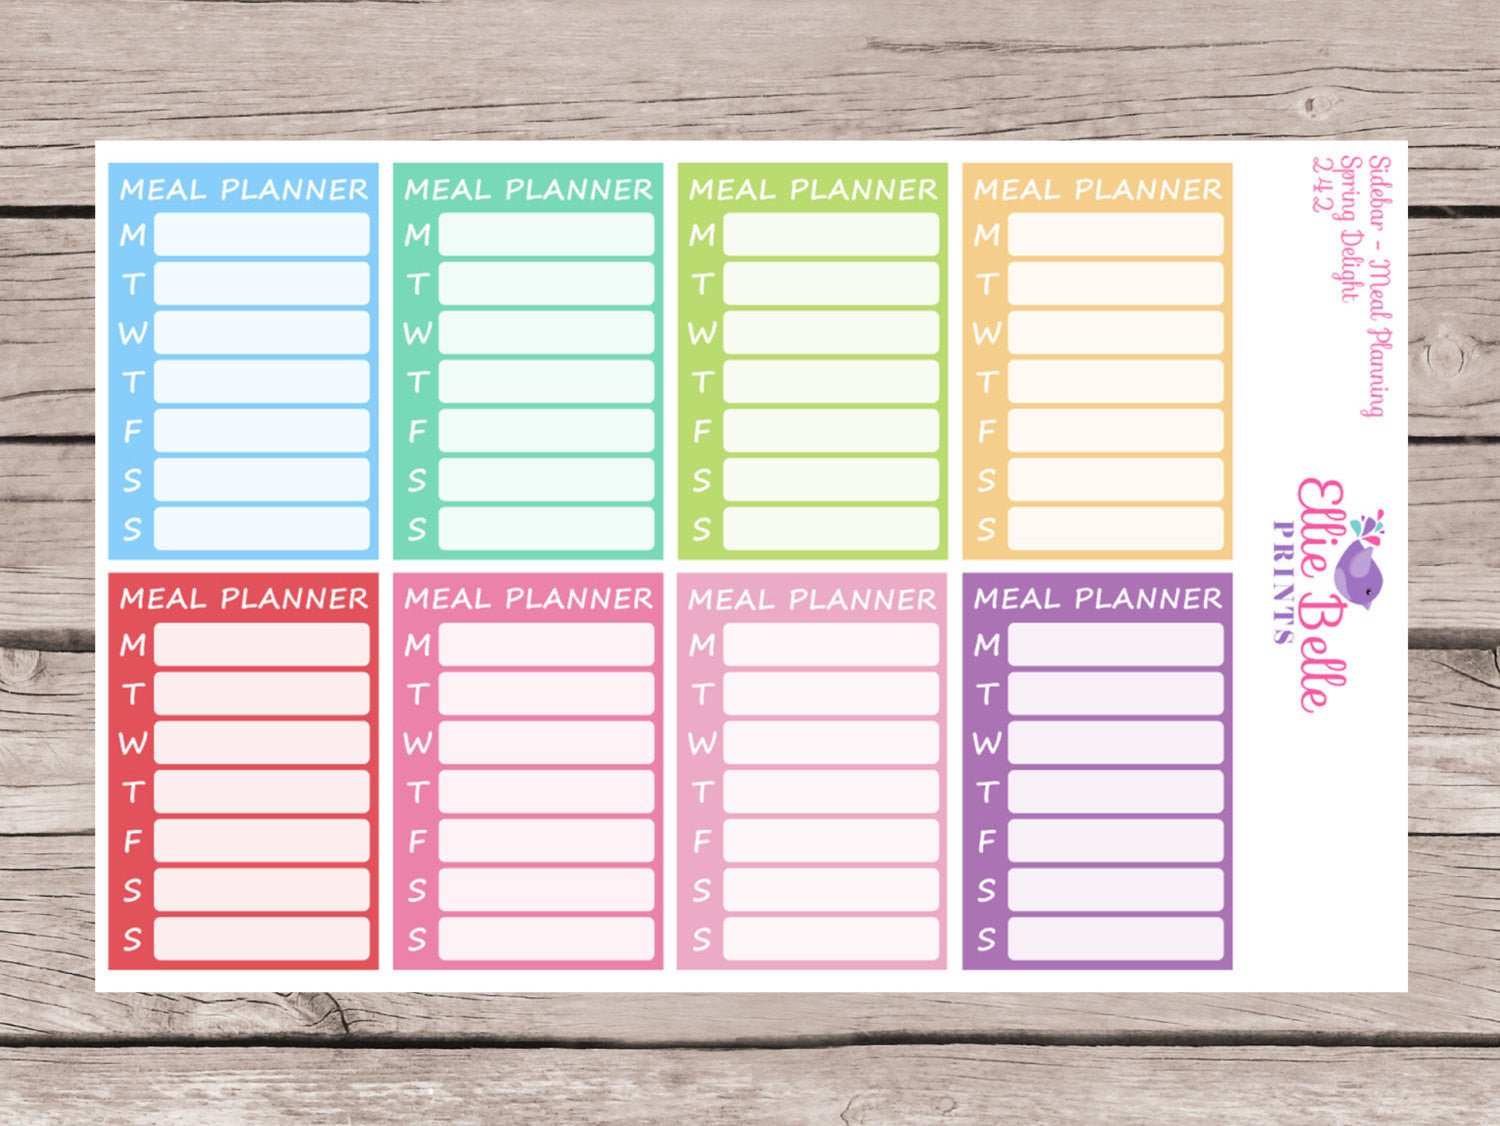 Weekly Meal Planning Stickers - Sidebar Tracker [242]